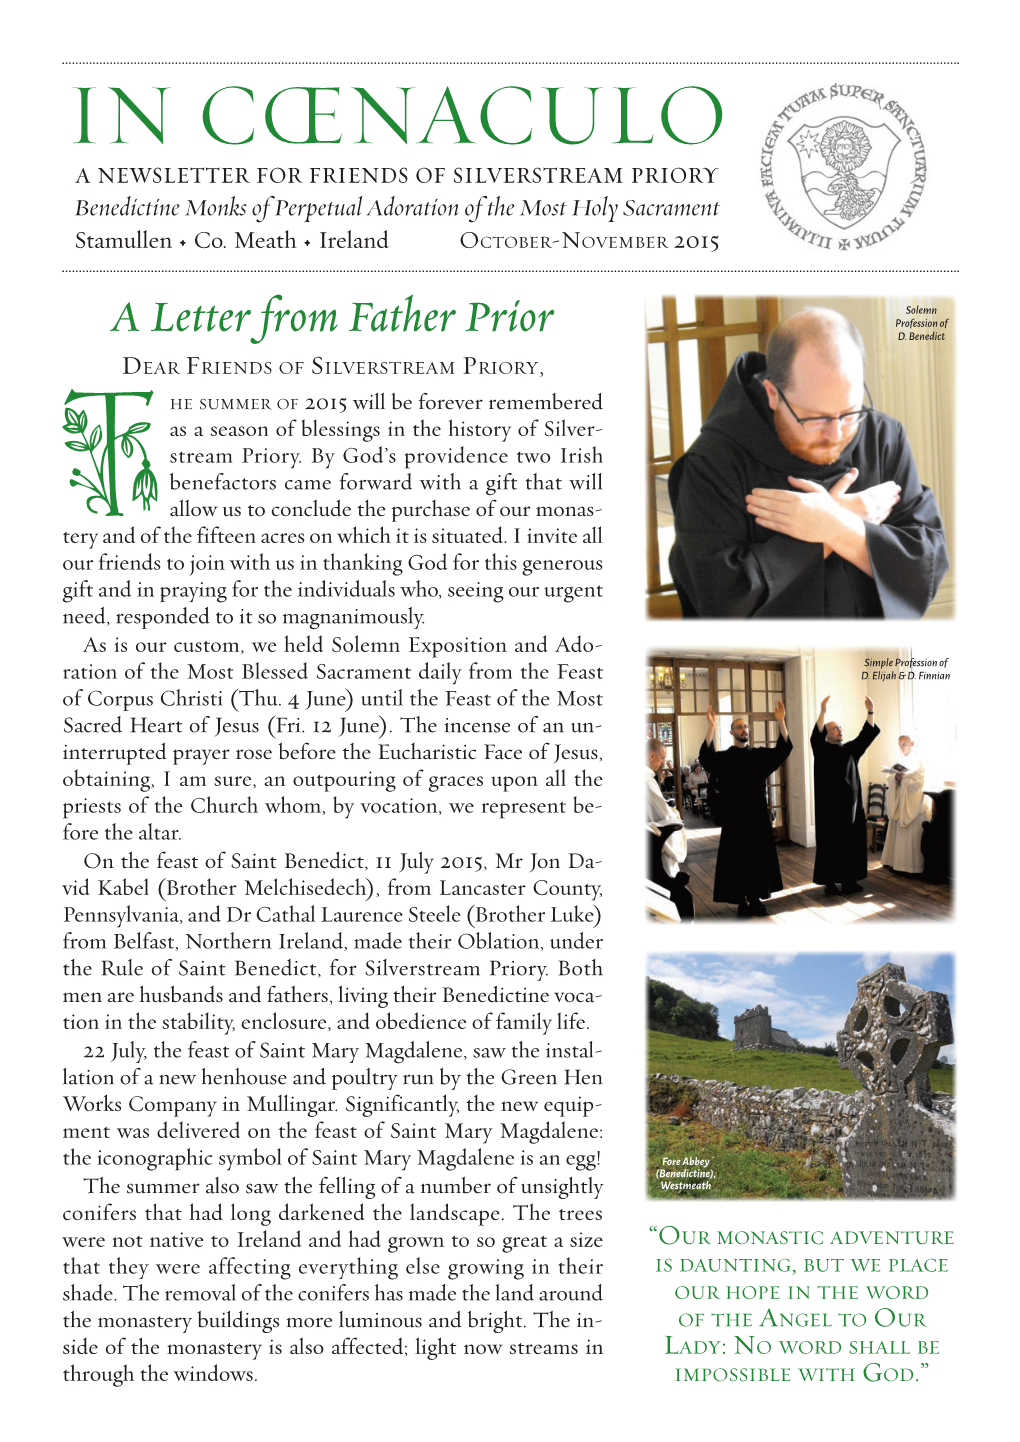 IN CŒNACULO a Newsletter for Friends of Silverstream Priory Benedictine Monks of Perpetual Adoration of the Most Holy Sacrament Stamullen • Co